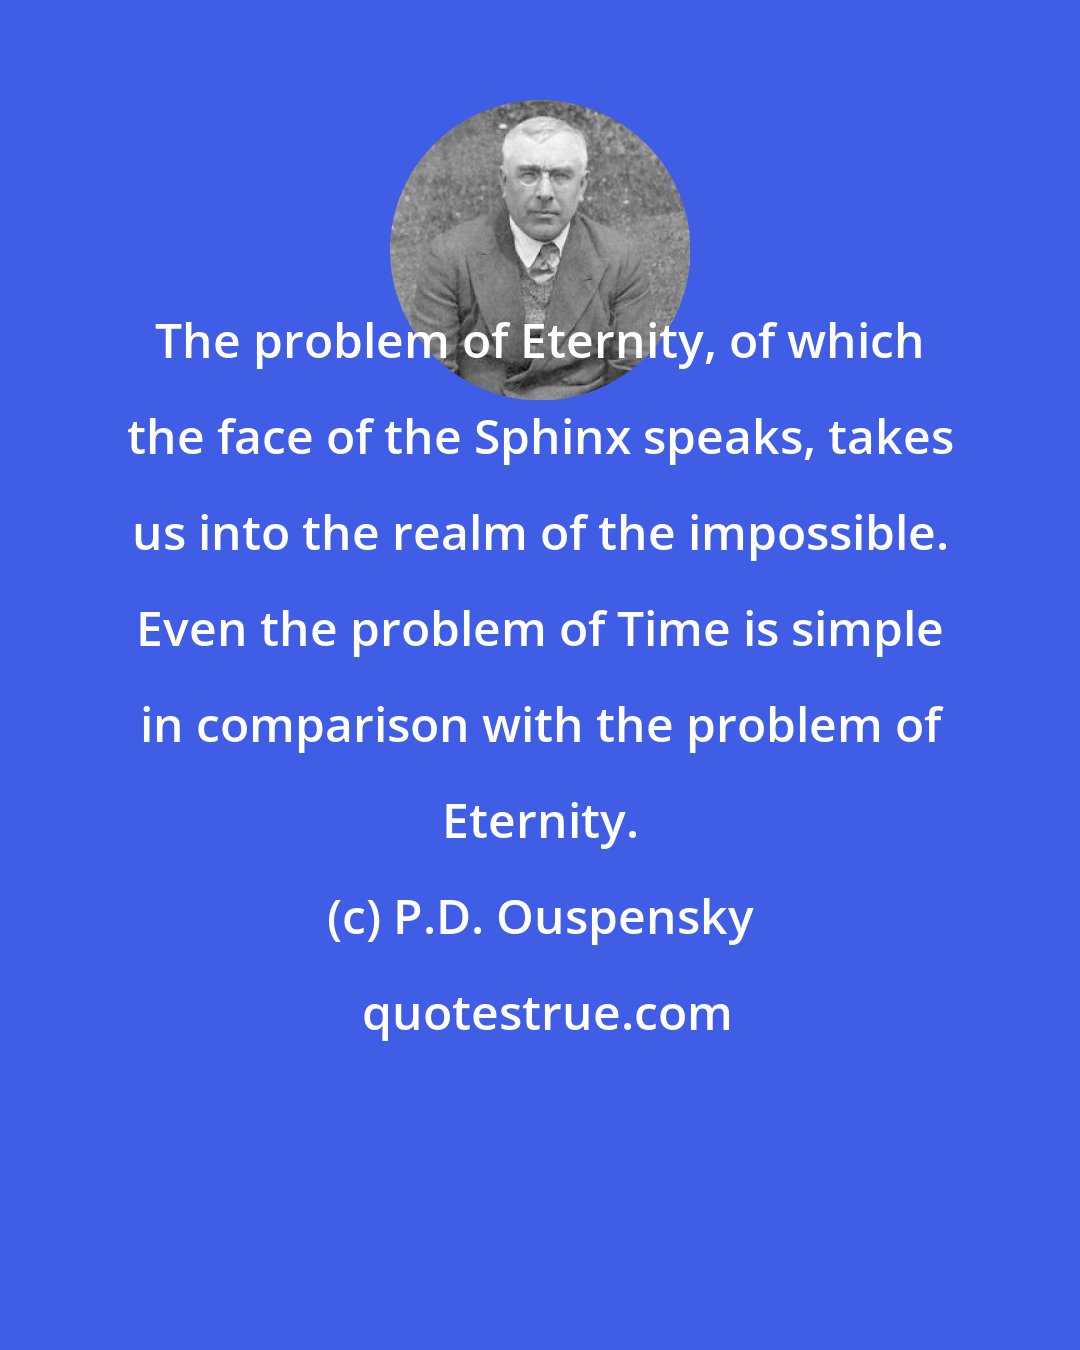 P.D. Ouspensky: The problem of Eternity, of which the face of the Sphinx speaks, takes us into the realm of the impossible. Even the problem of Time is simple in comparison with the problem of Eternity.